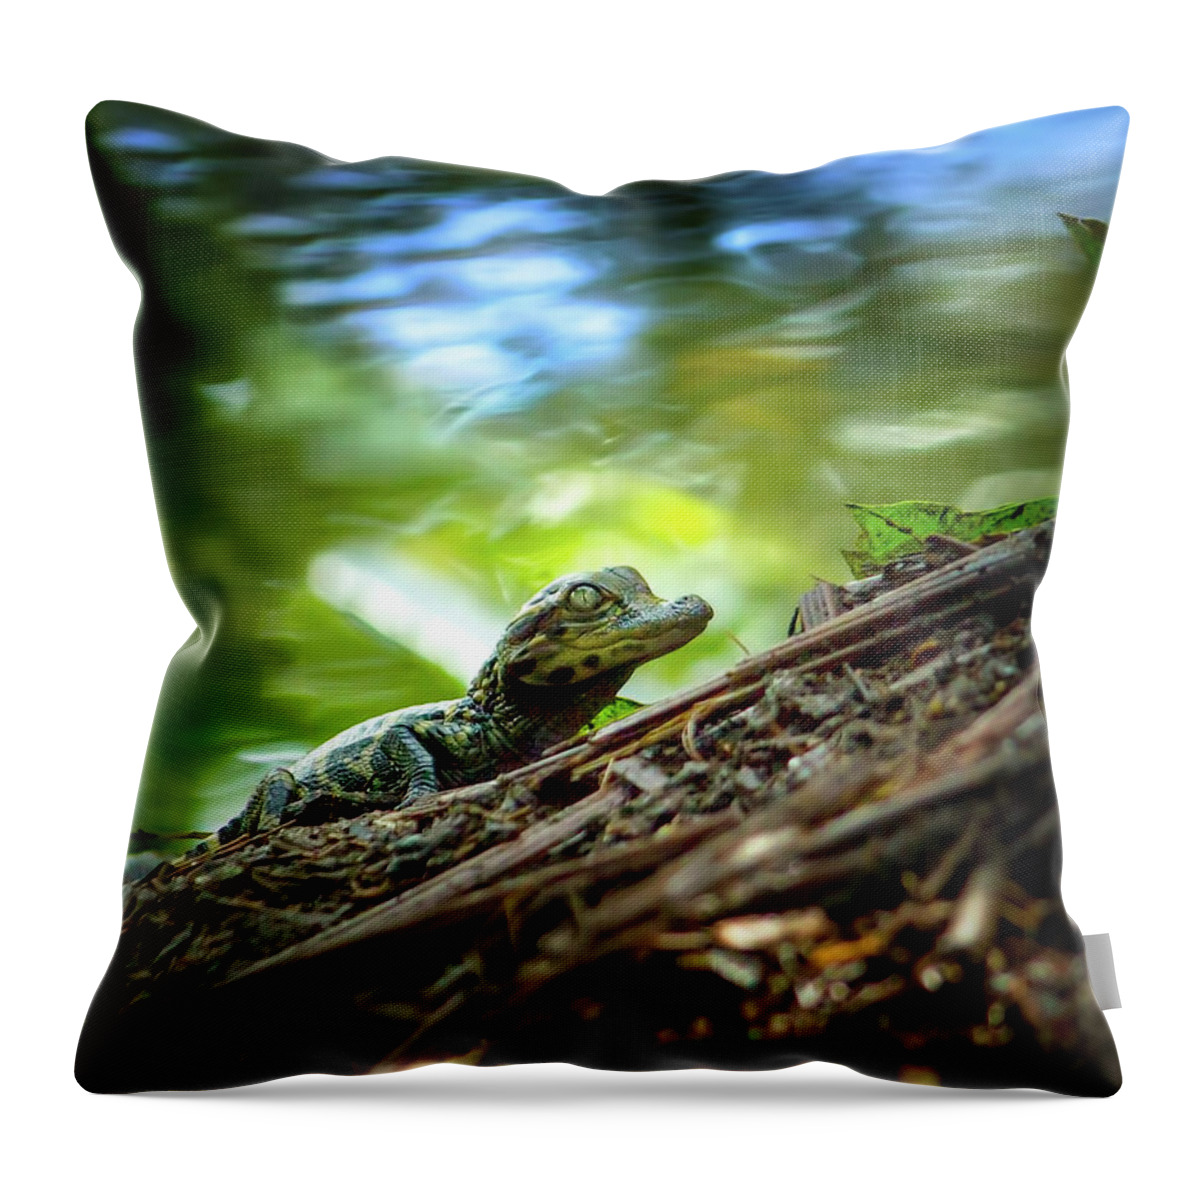 Alligator Throw Pillow featuring the photograph Gator Baby by Mark Andrew Thomas